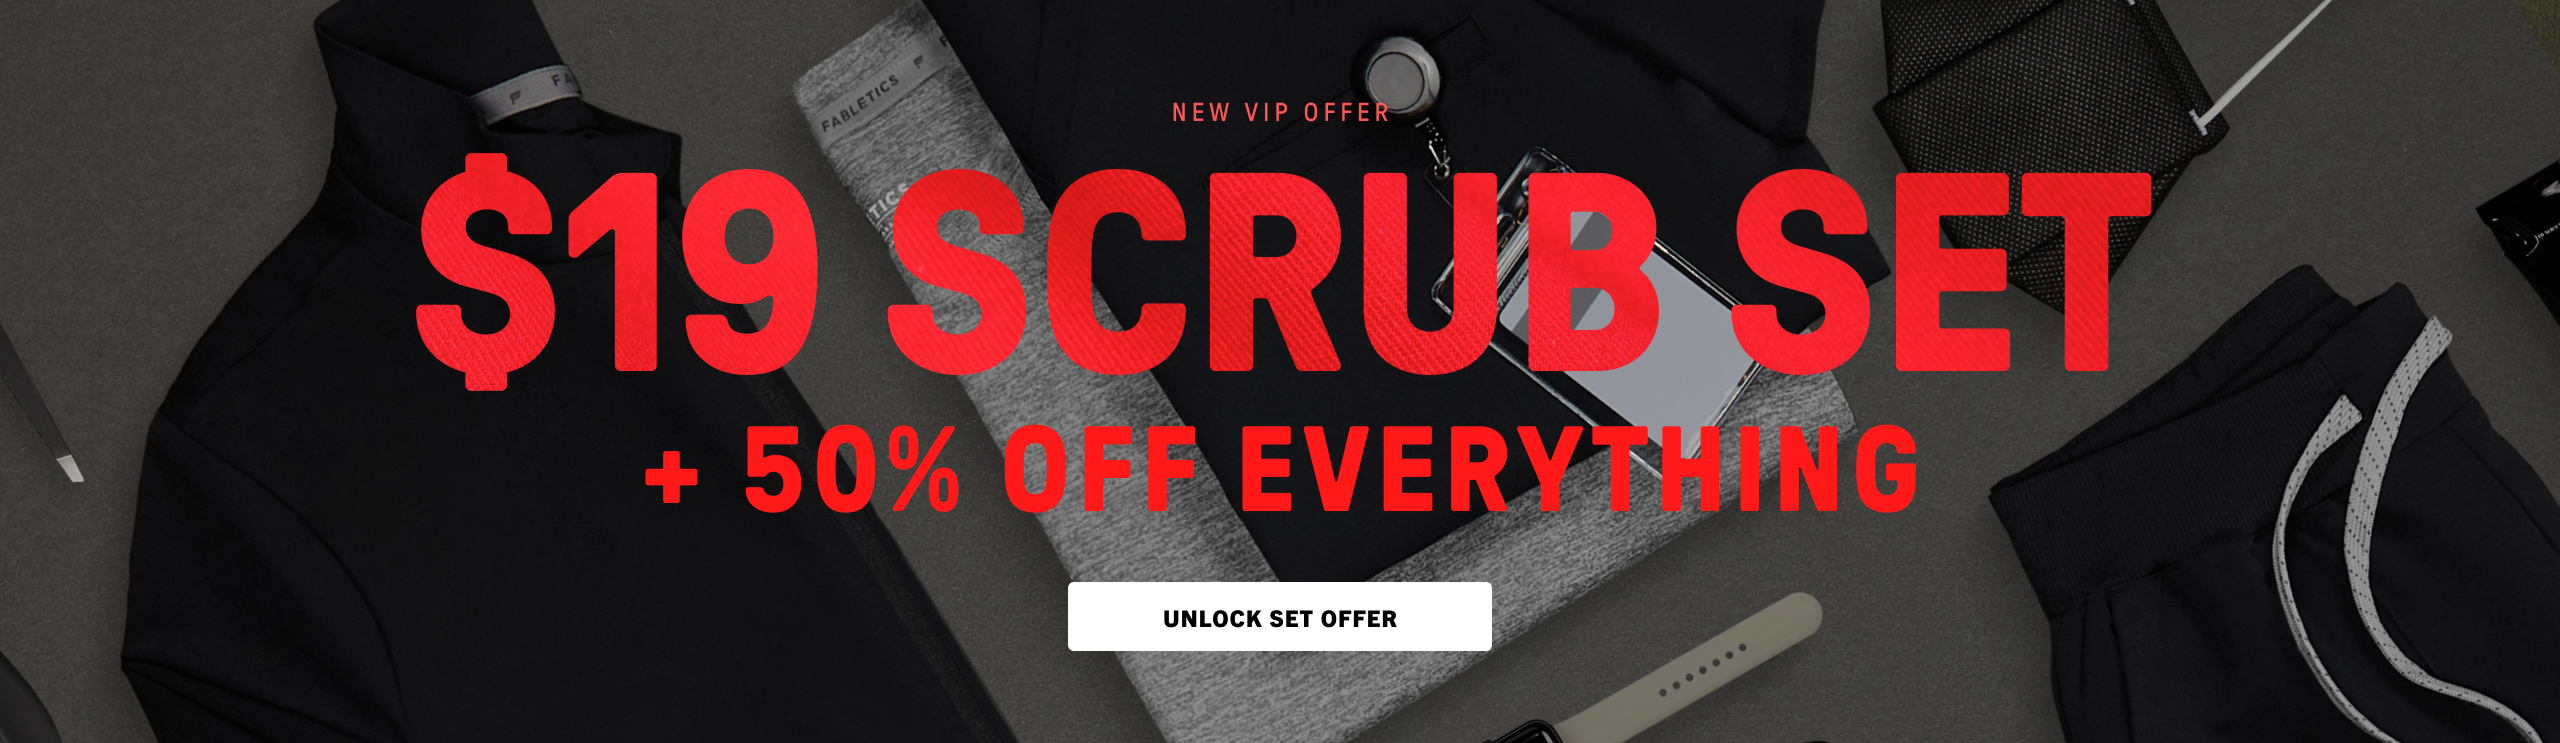 Black Friday exclusive deal! $19 Scrub Set + 50% off everything when you check out as a new VIP member. Click to unlock set offer.